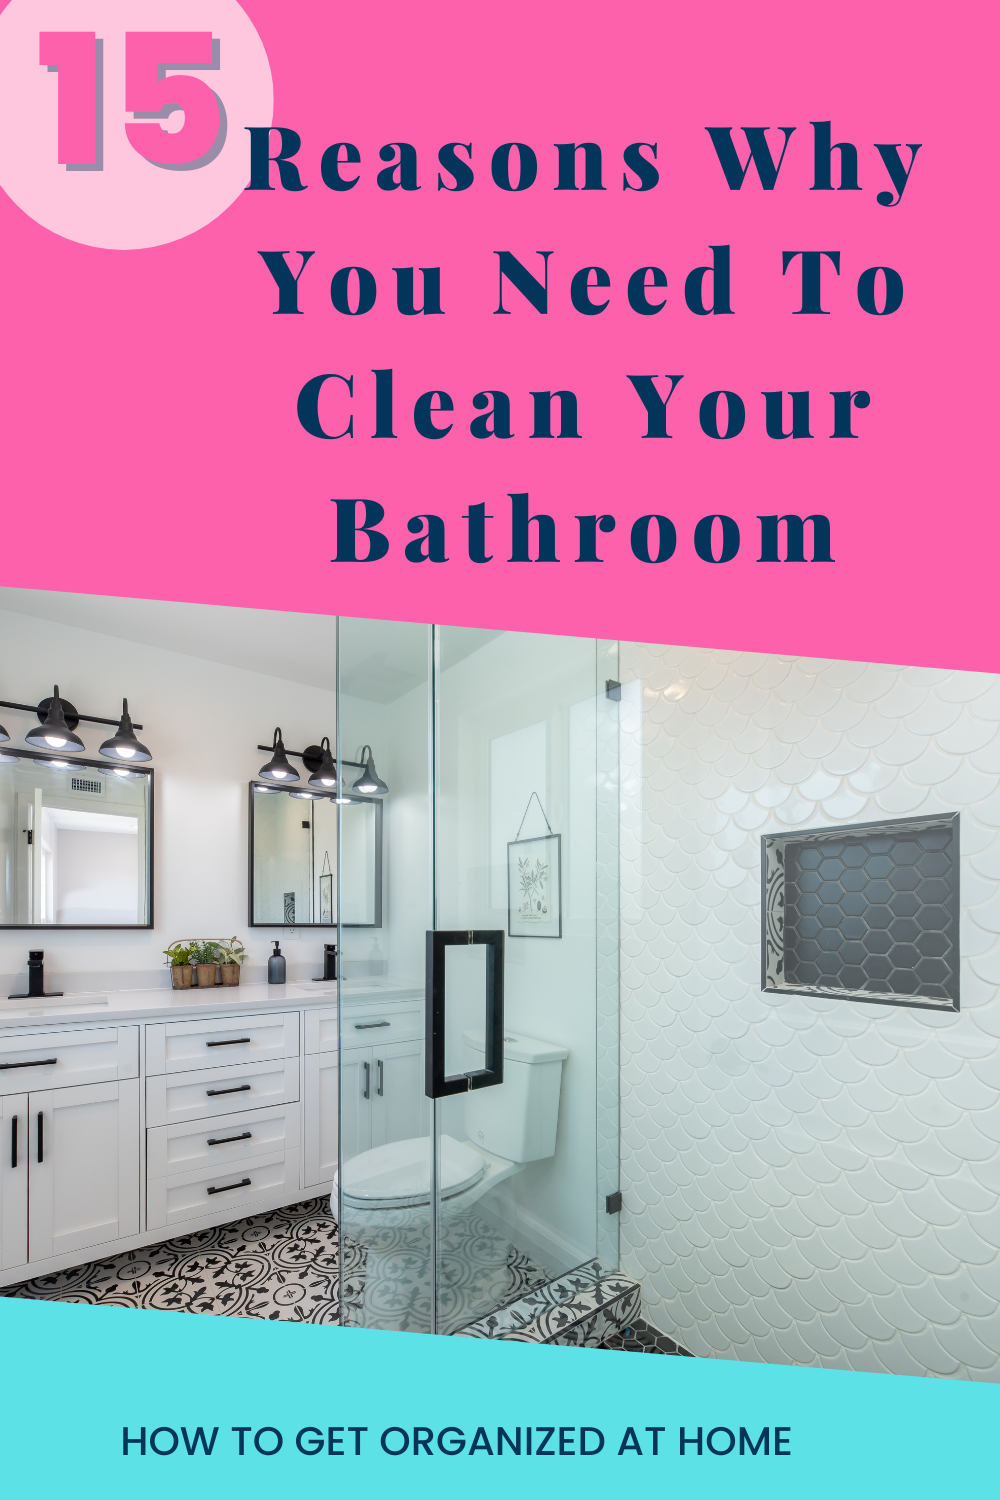 How to Clean Everything in your Bathroom! 